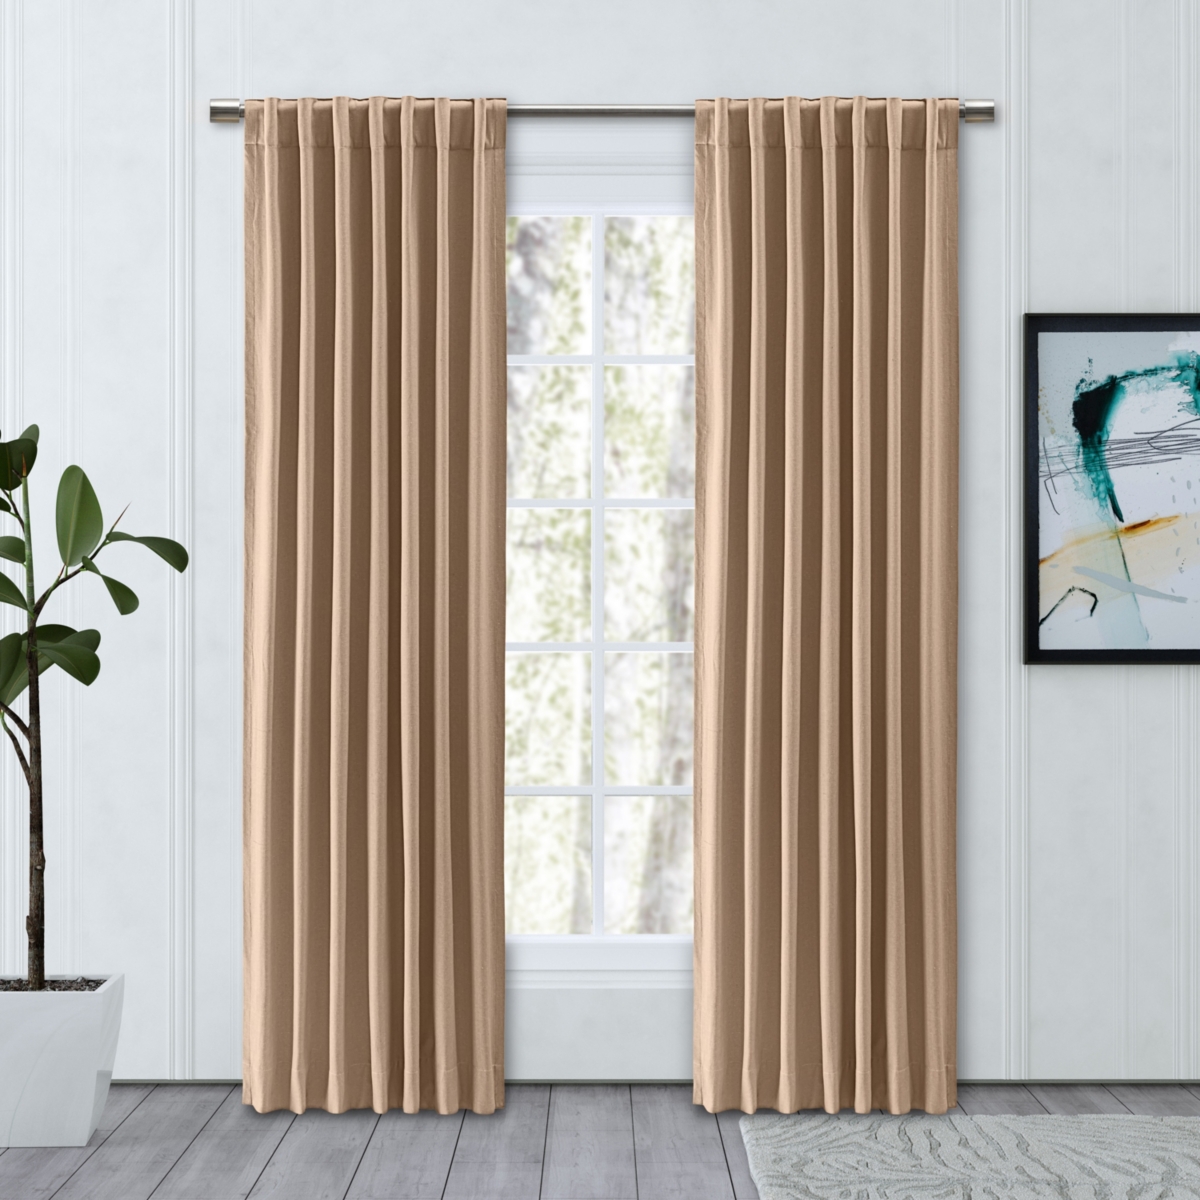 Chevron 80C/20P Sustainable Unlined Rod Pocket w/Back Tabs Curtain Panel 48"W x 96"L - Natural